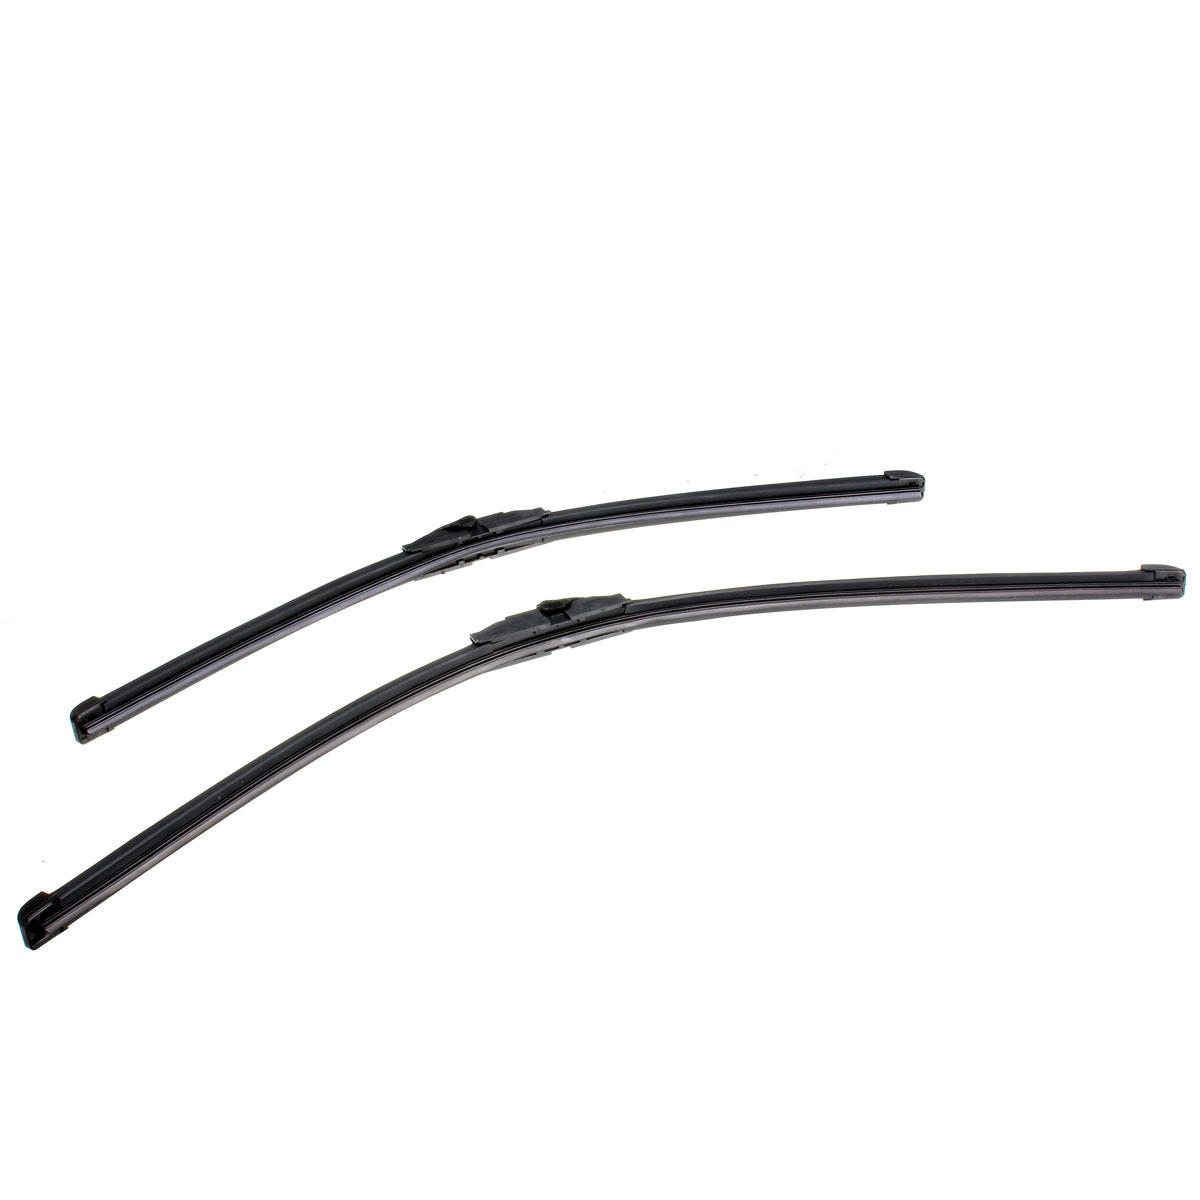 front windscreen wiper blades for honda civic 2005-2011 28 30 inch Sale - Banggood.com 2011 Honda Civic Lx Wiper Blade Size